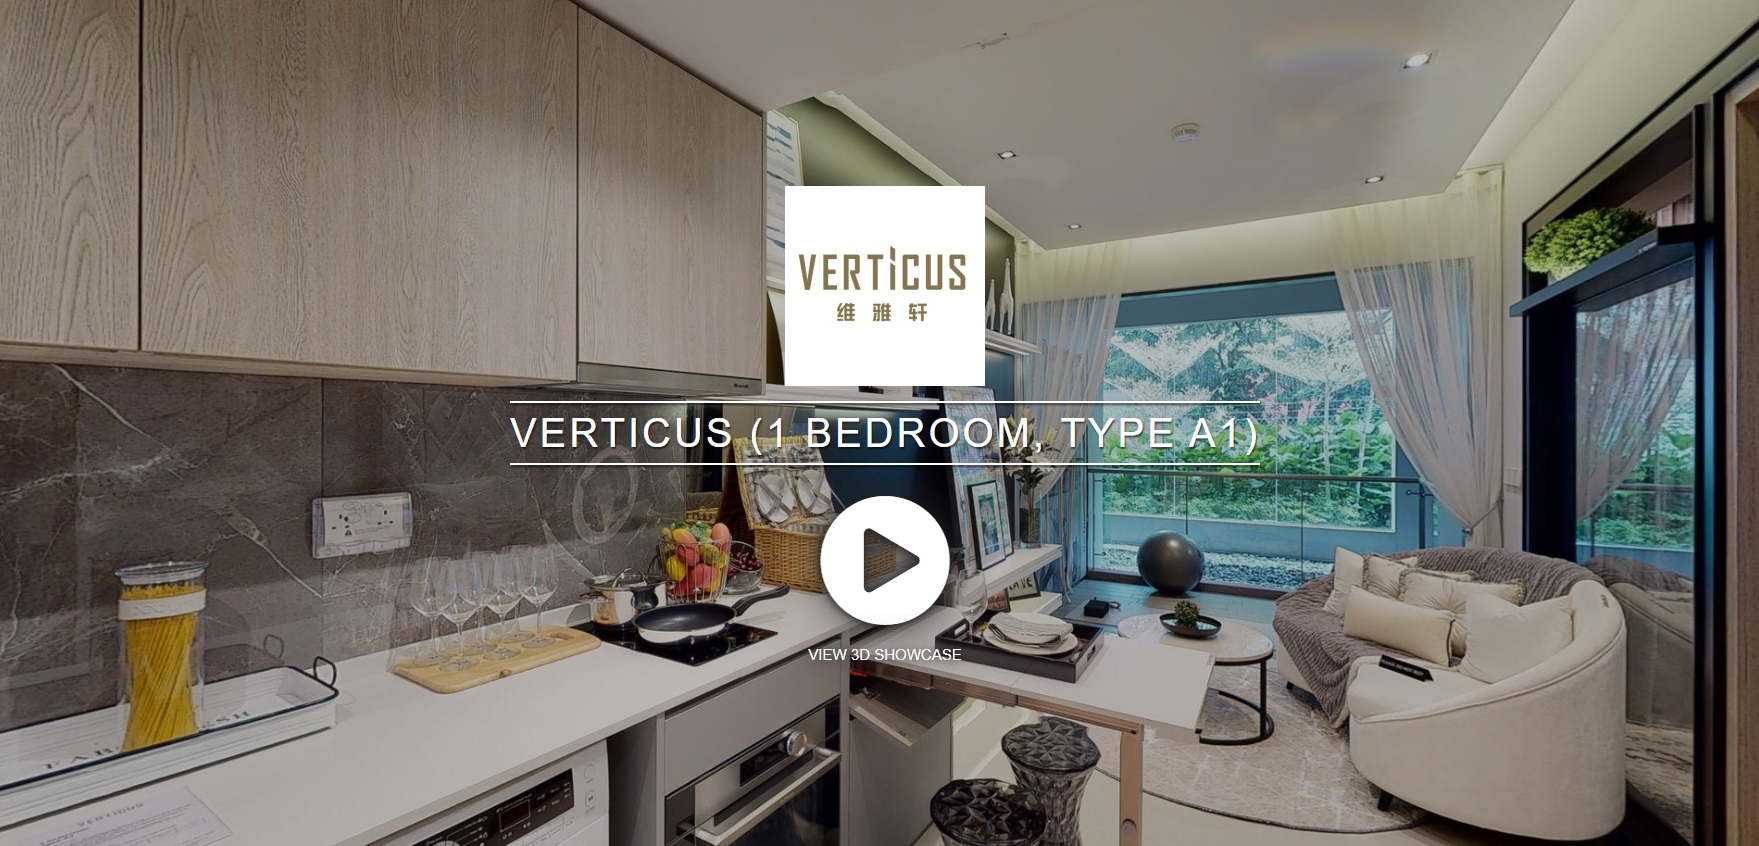 3D Virtual Tour of Verticus 1 Bedroom Showflat, Type A1